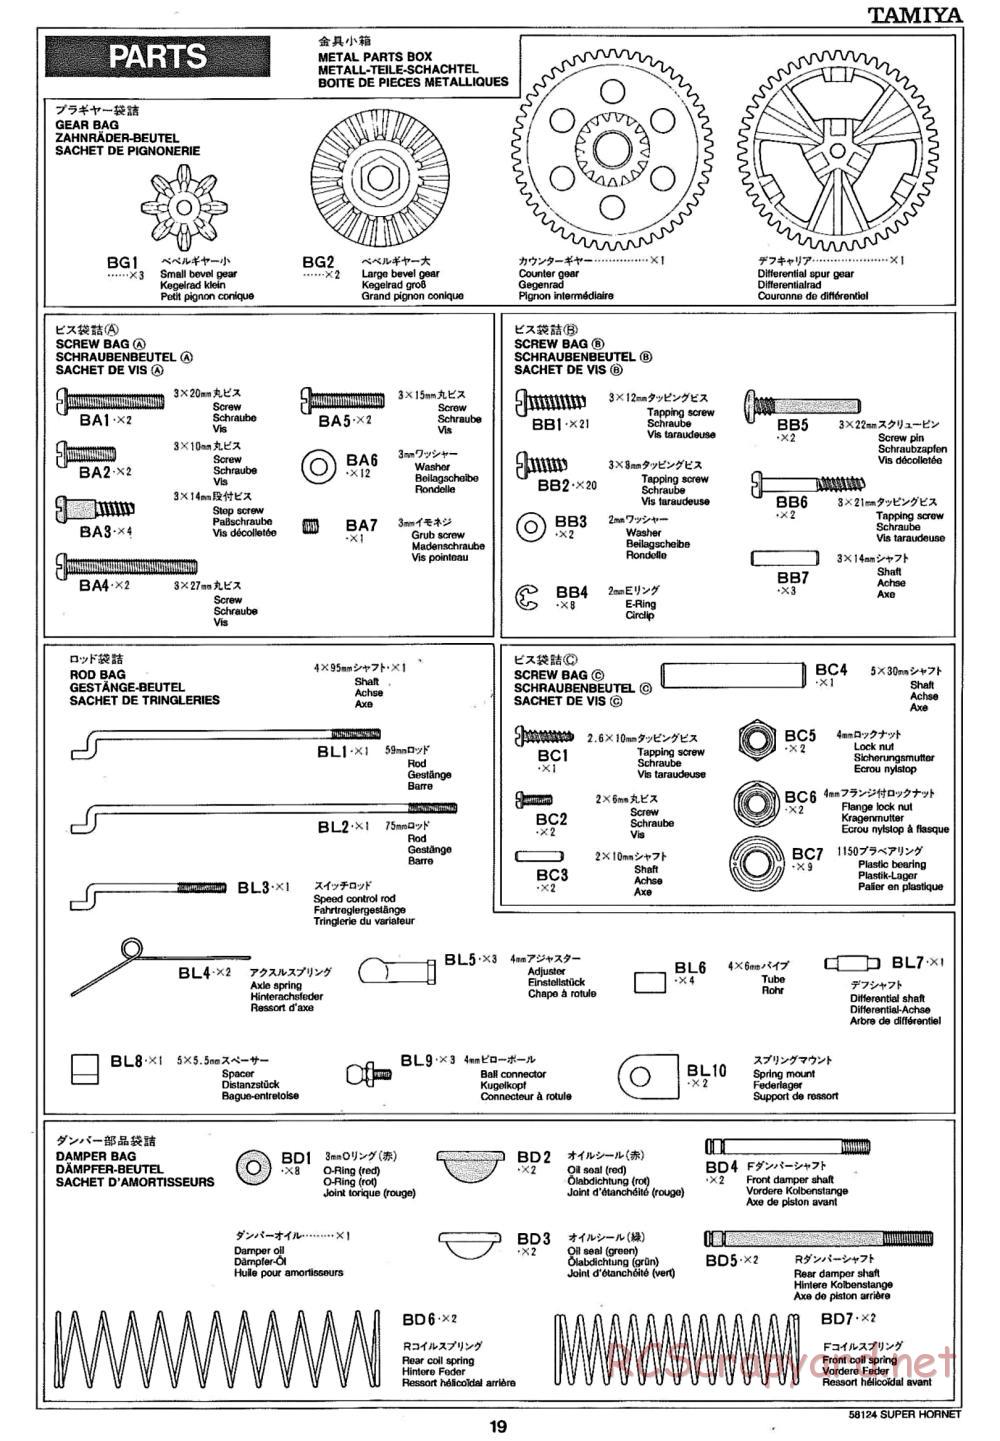 Tamiya - Super Hornet Chassis - Manual - Page 19